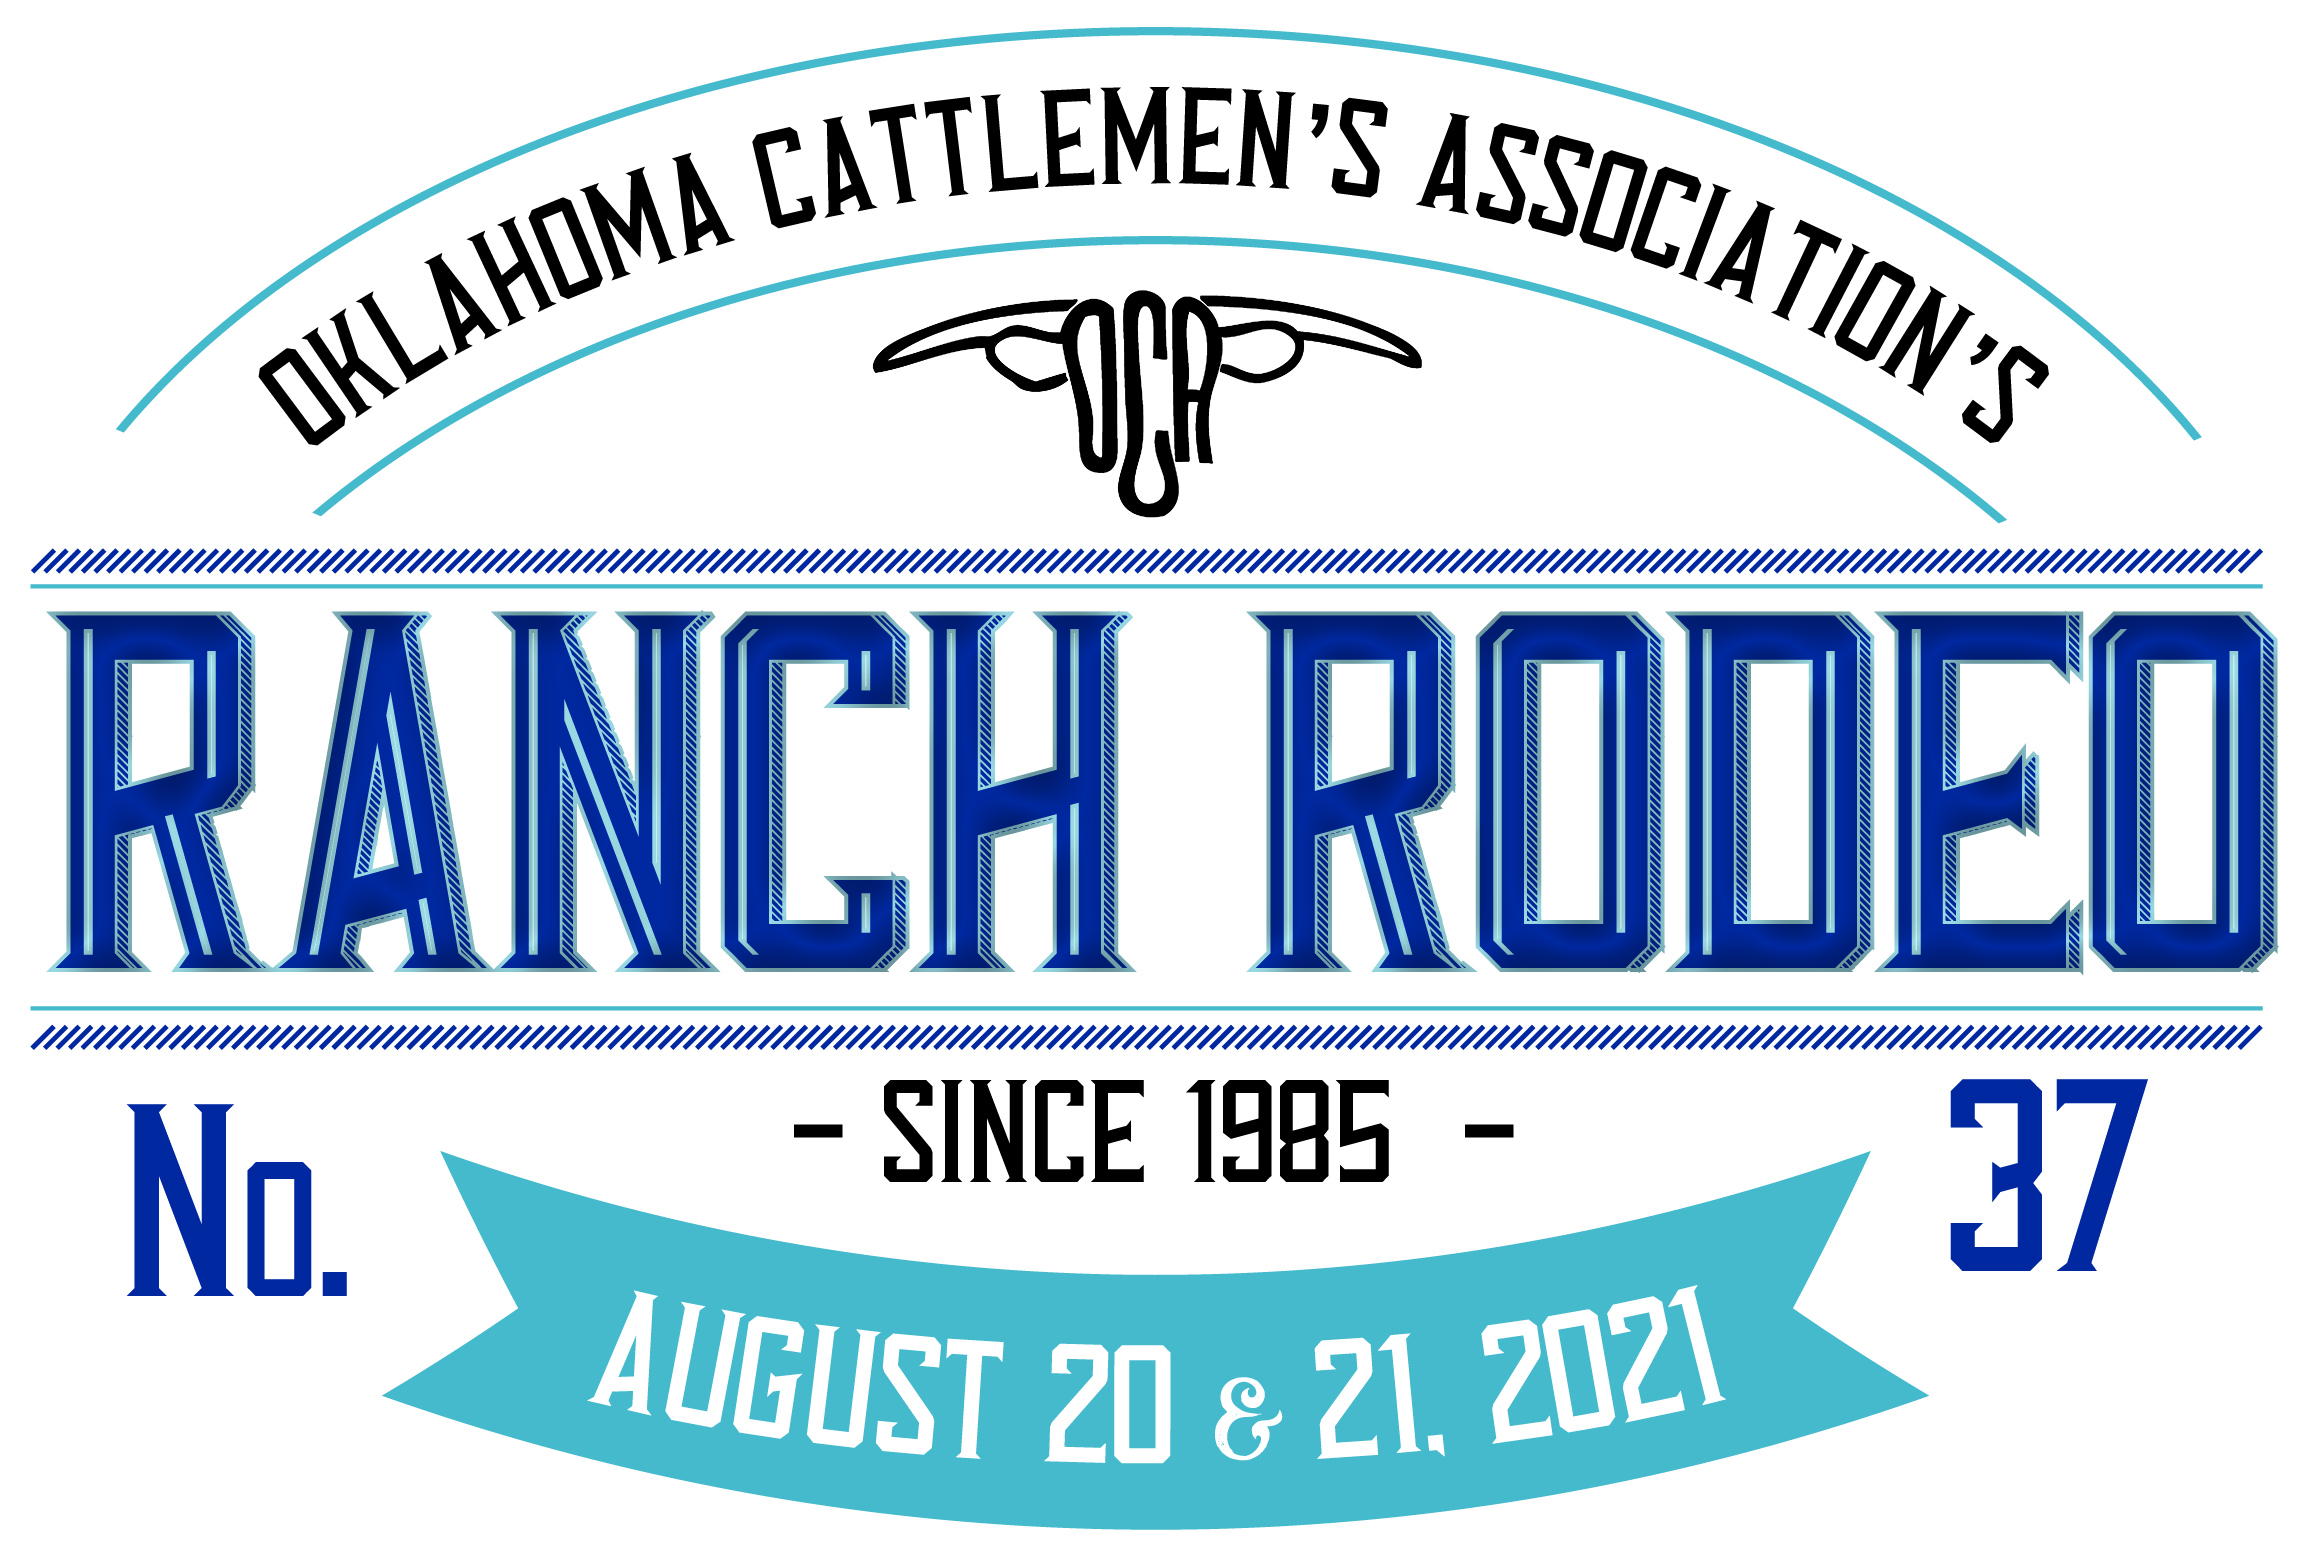 OCA Leader Wes Givens Invites Public to Attend Annual Ranch Rodeo to Support Oklahoma Children's Hospital Foundation